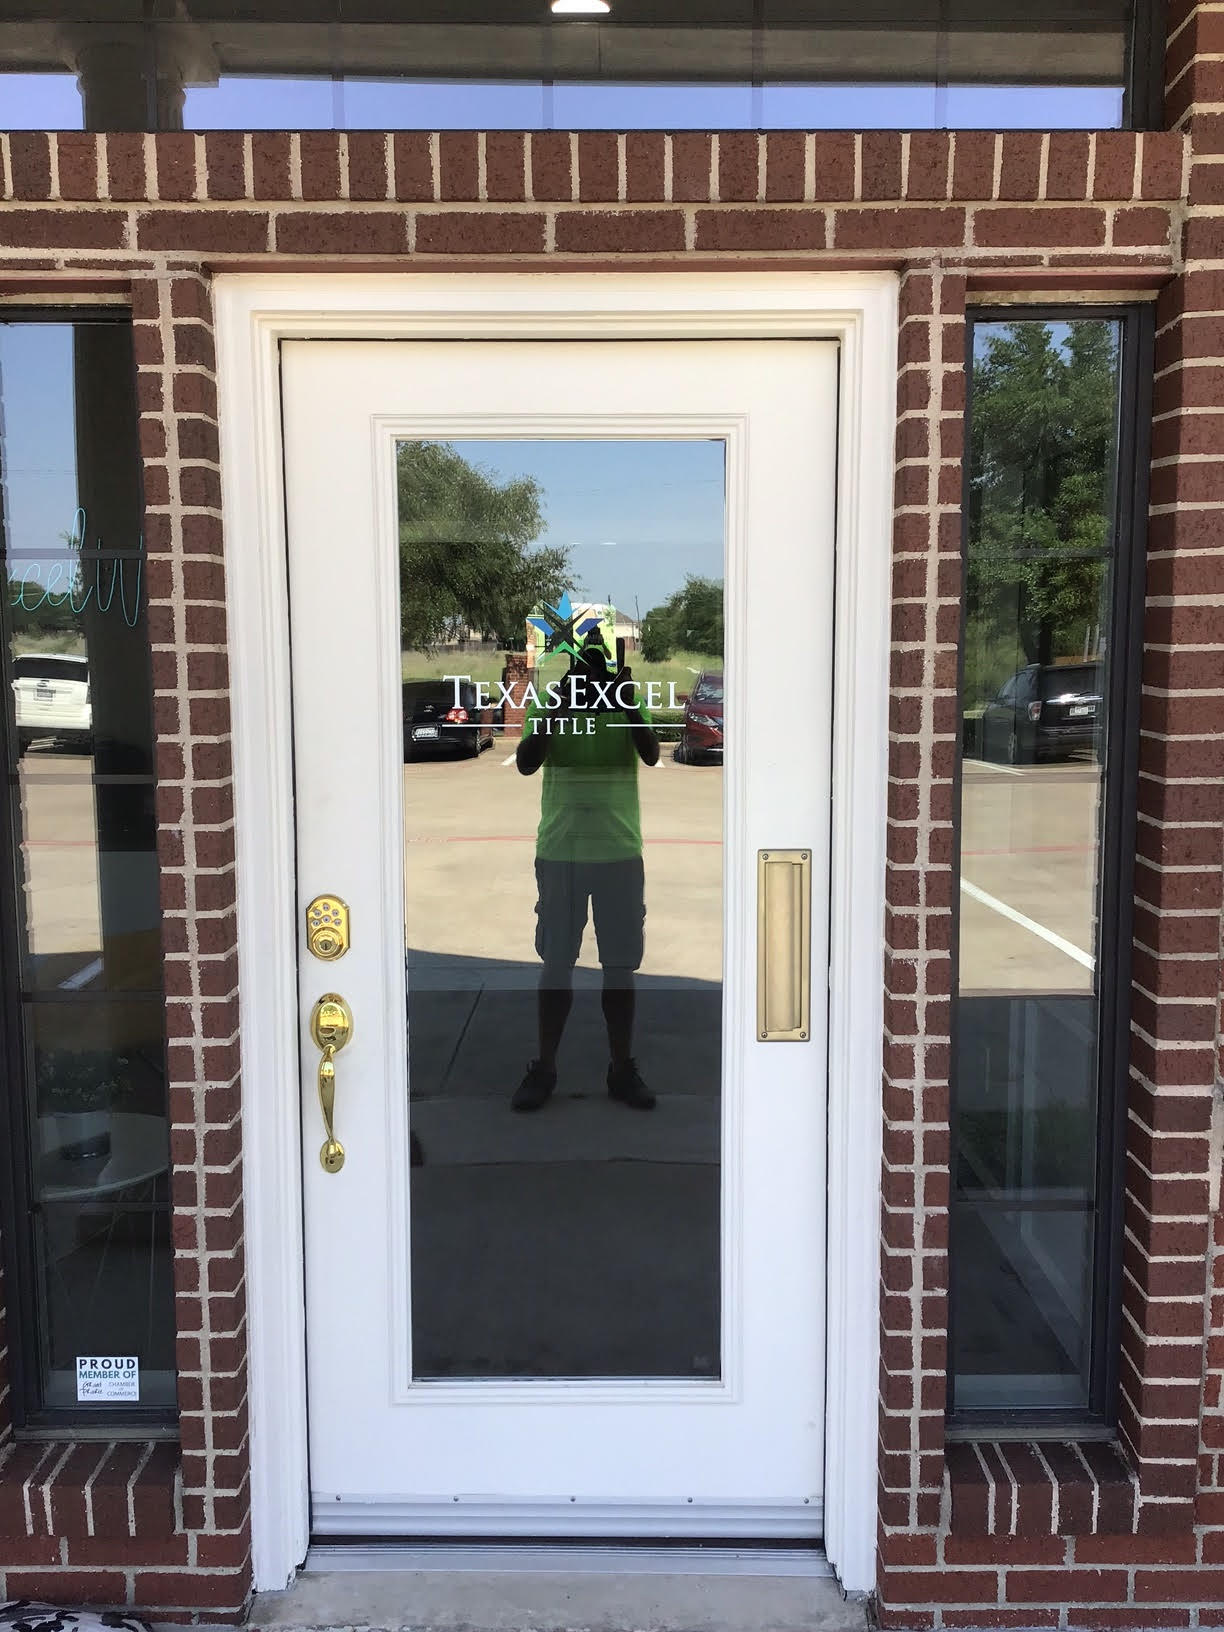 Vinyl sign of Texas Excel on door installed by Priority Signs & Graphics in Dallas, TX